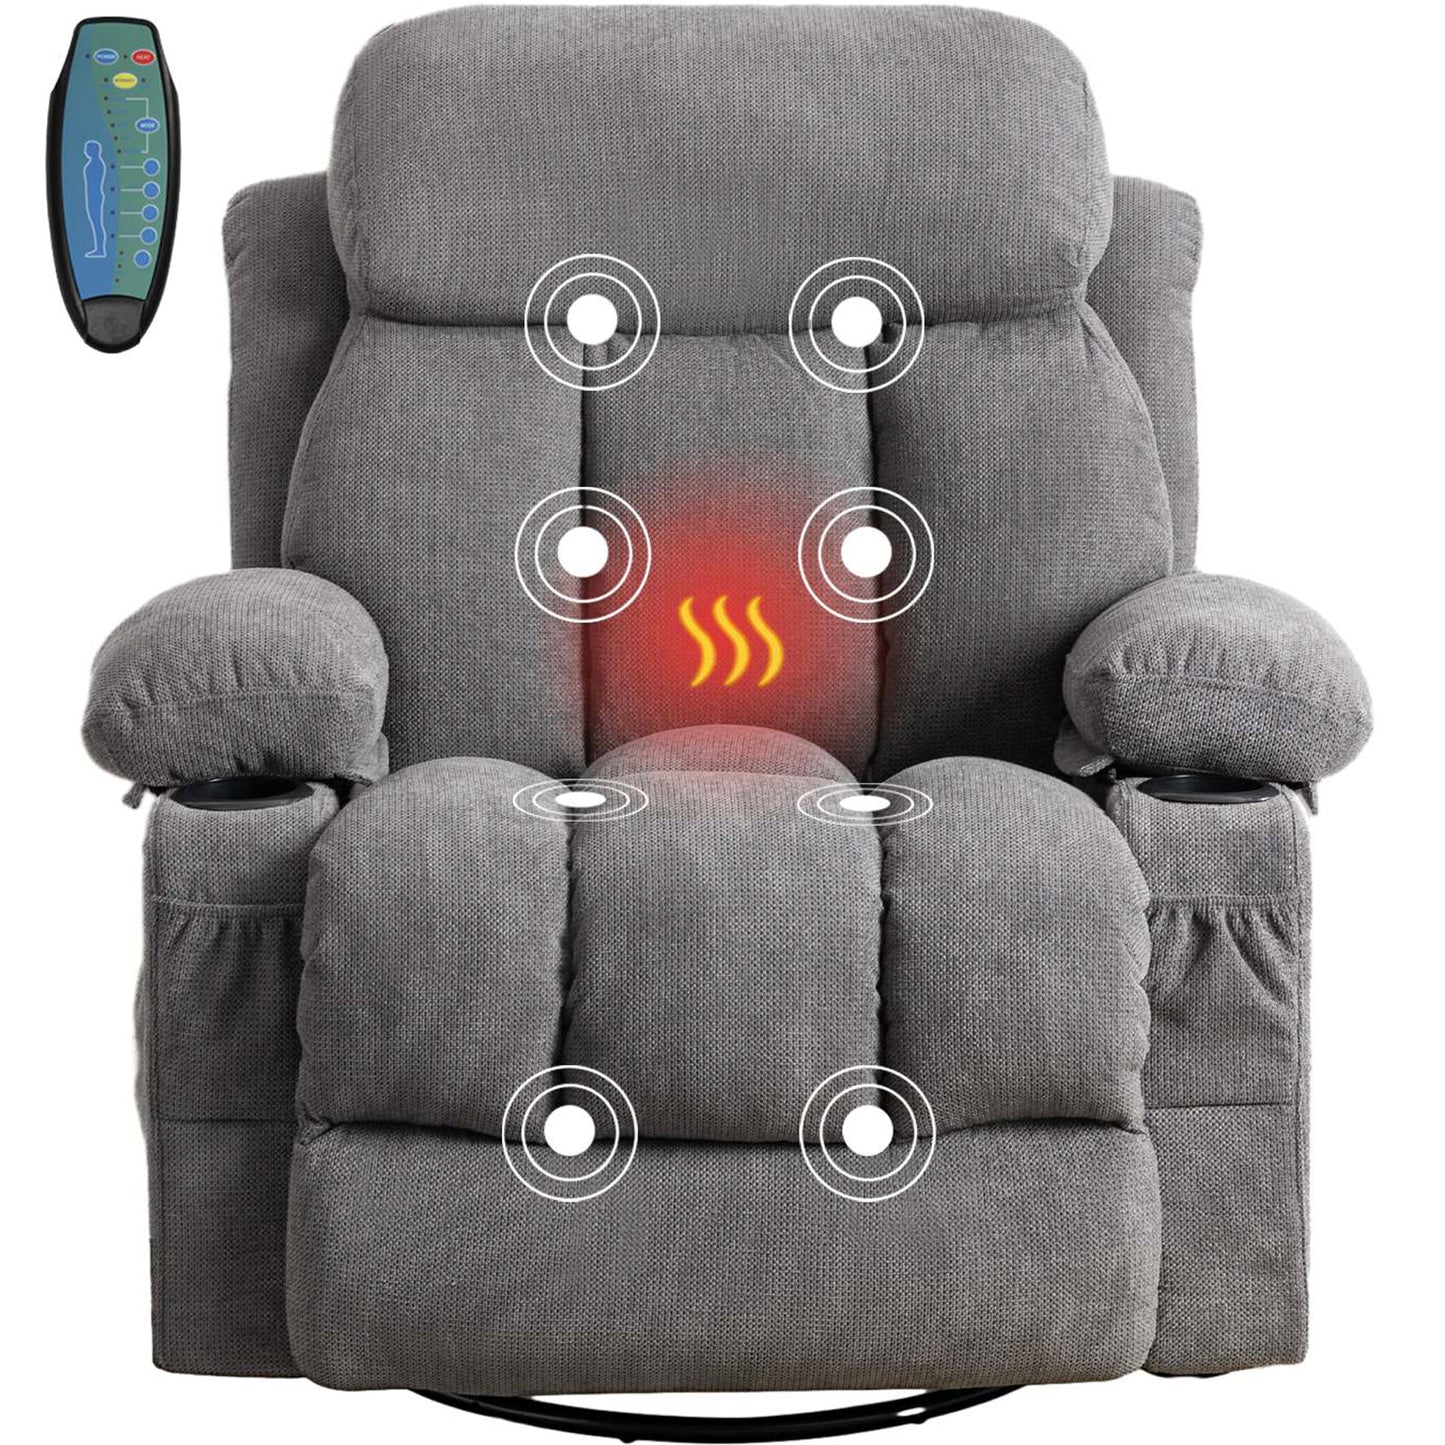 SYNGAR Manual Recliner Chair with Heat and Massage Function, USB and Cup Holders, Elderly Single Velvet Recliner Rocker Sofa Swivel Glider Chair for Nursery Living Room Home Theater Office, Gray